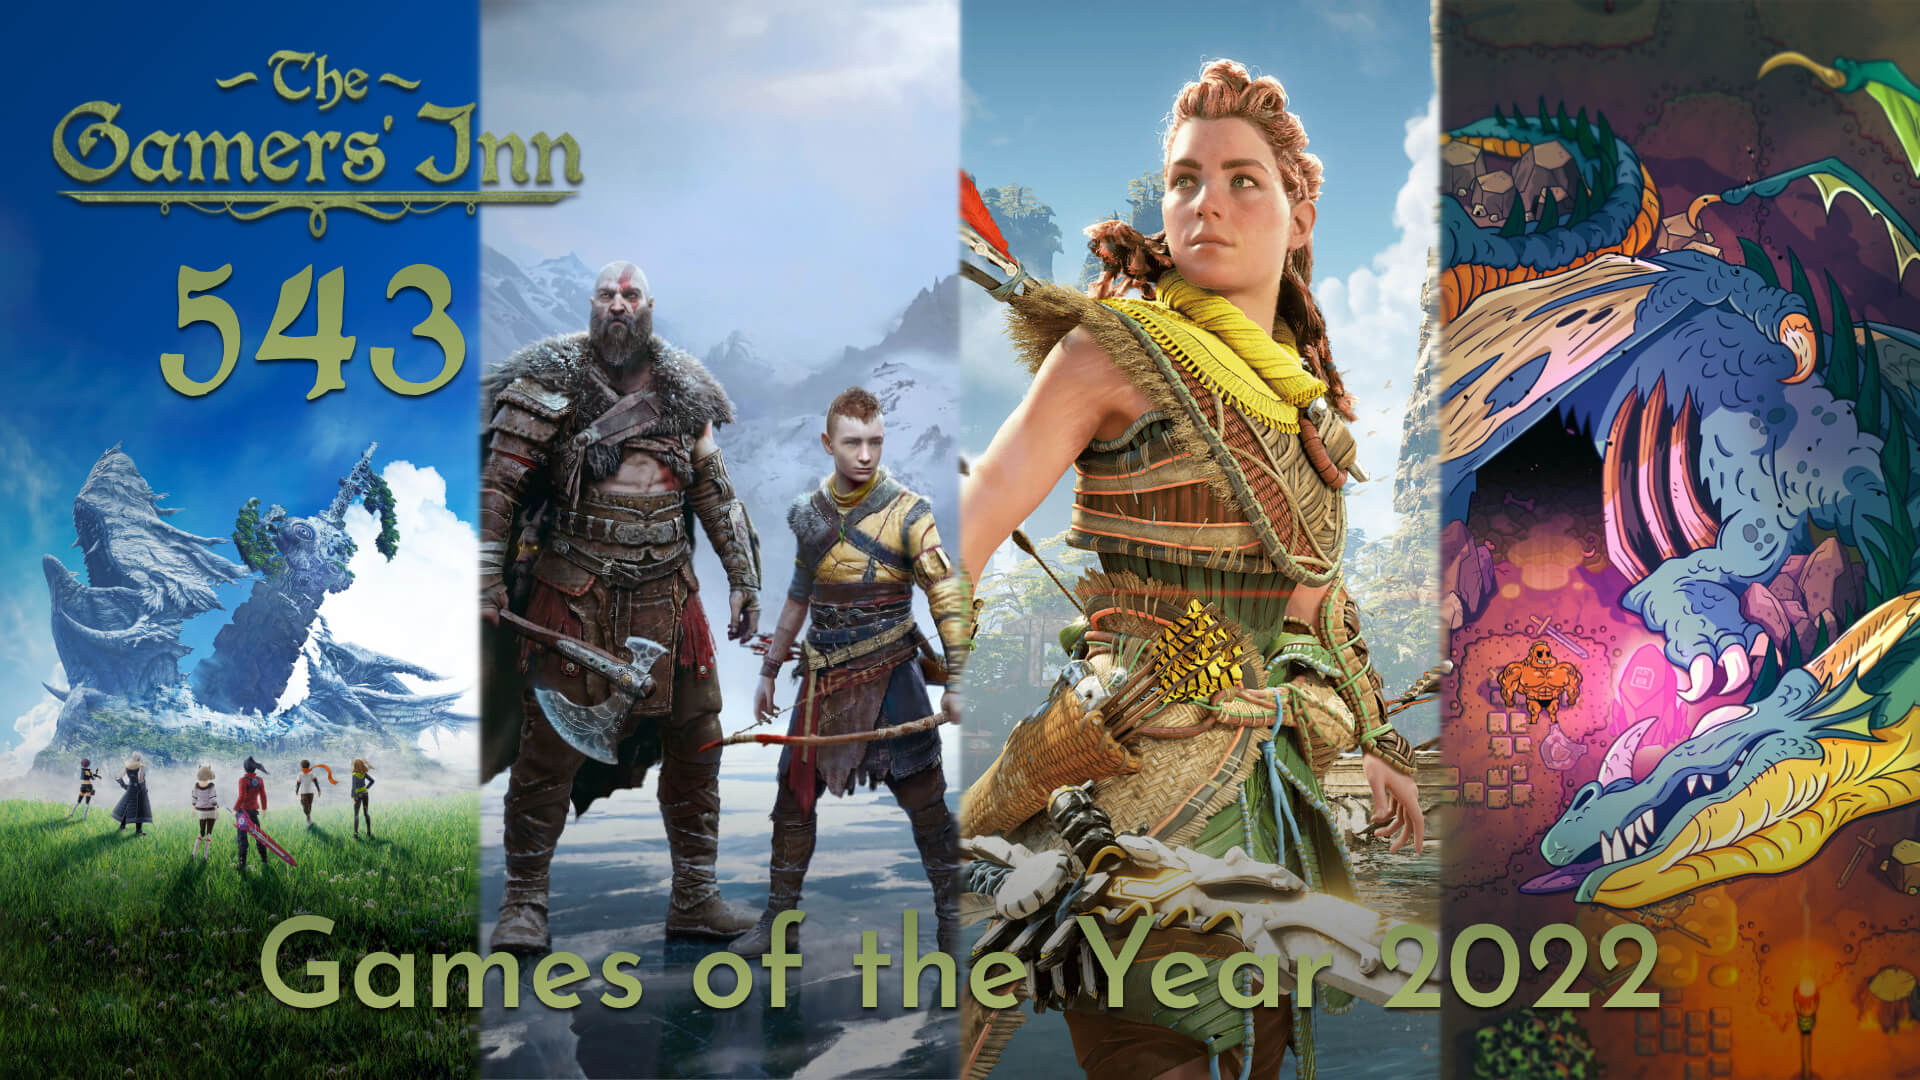 TGI 543 - Games of the Year 2022